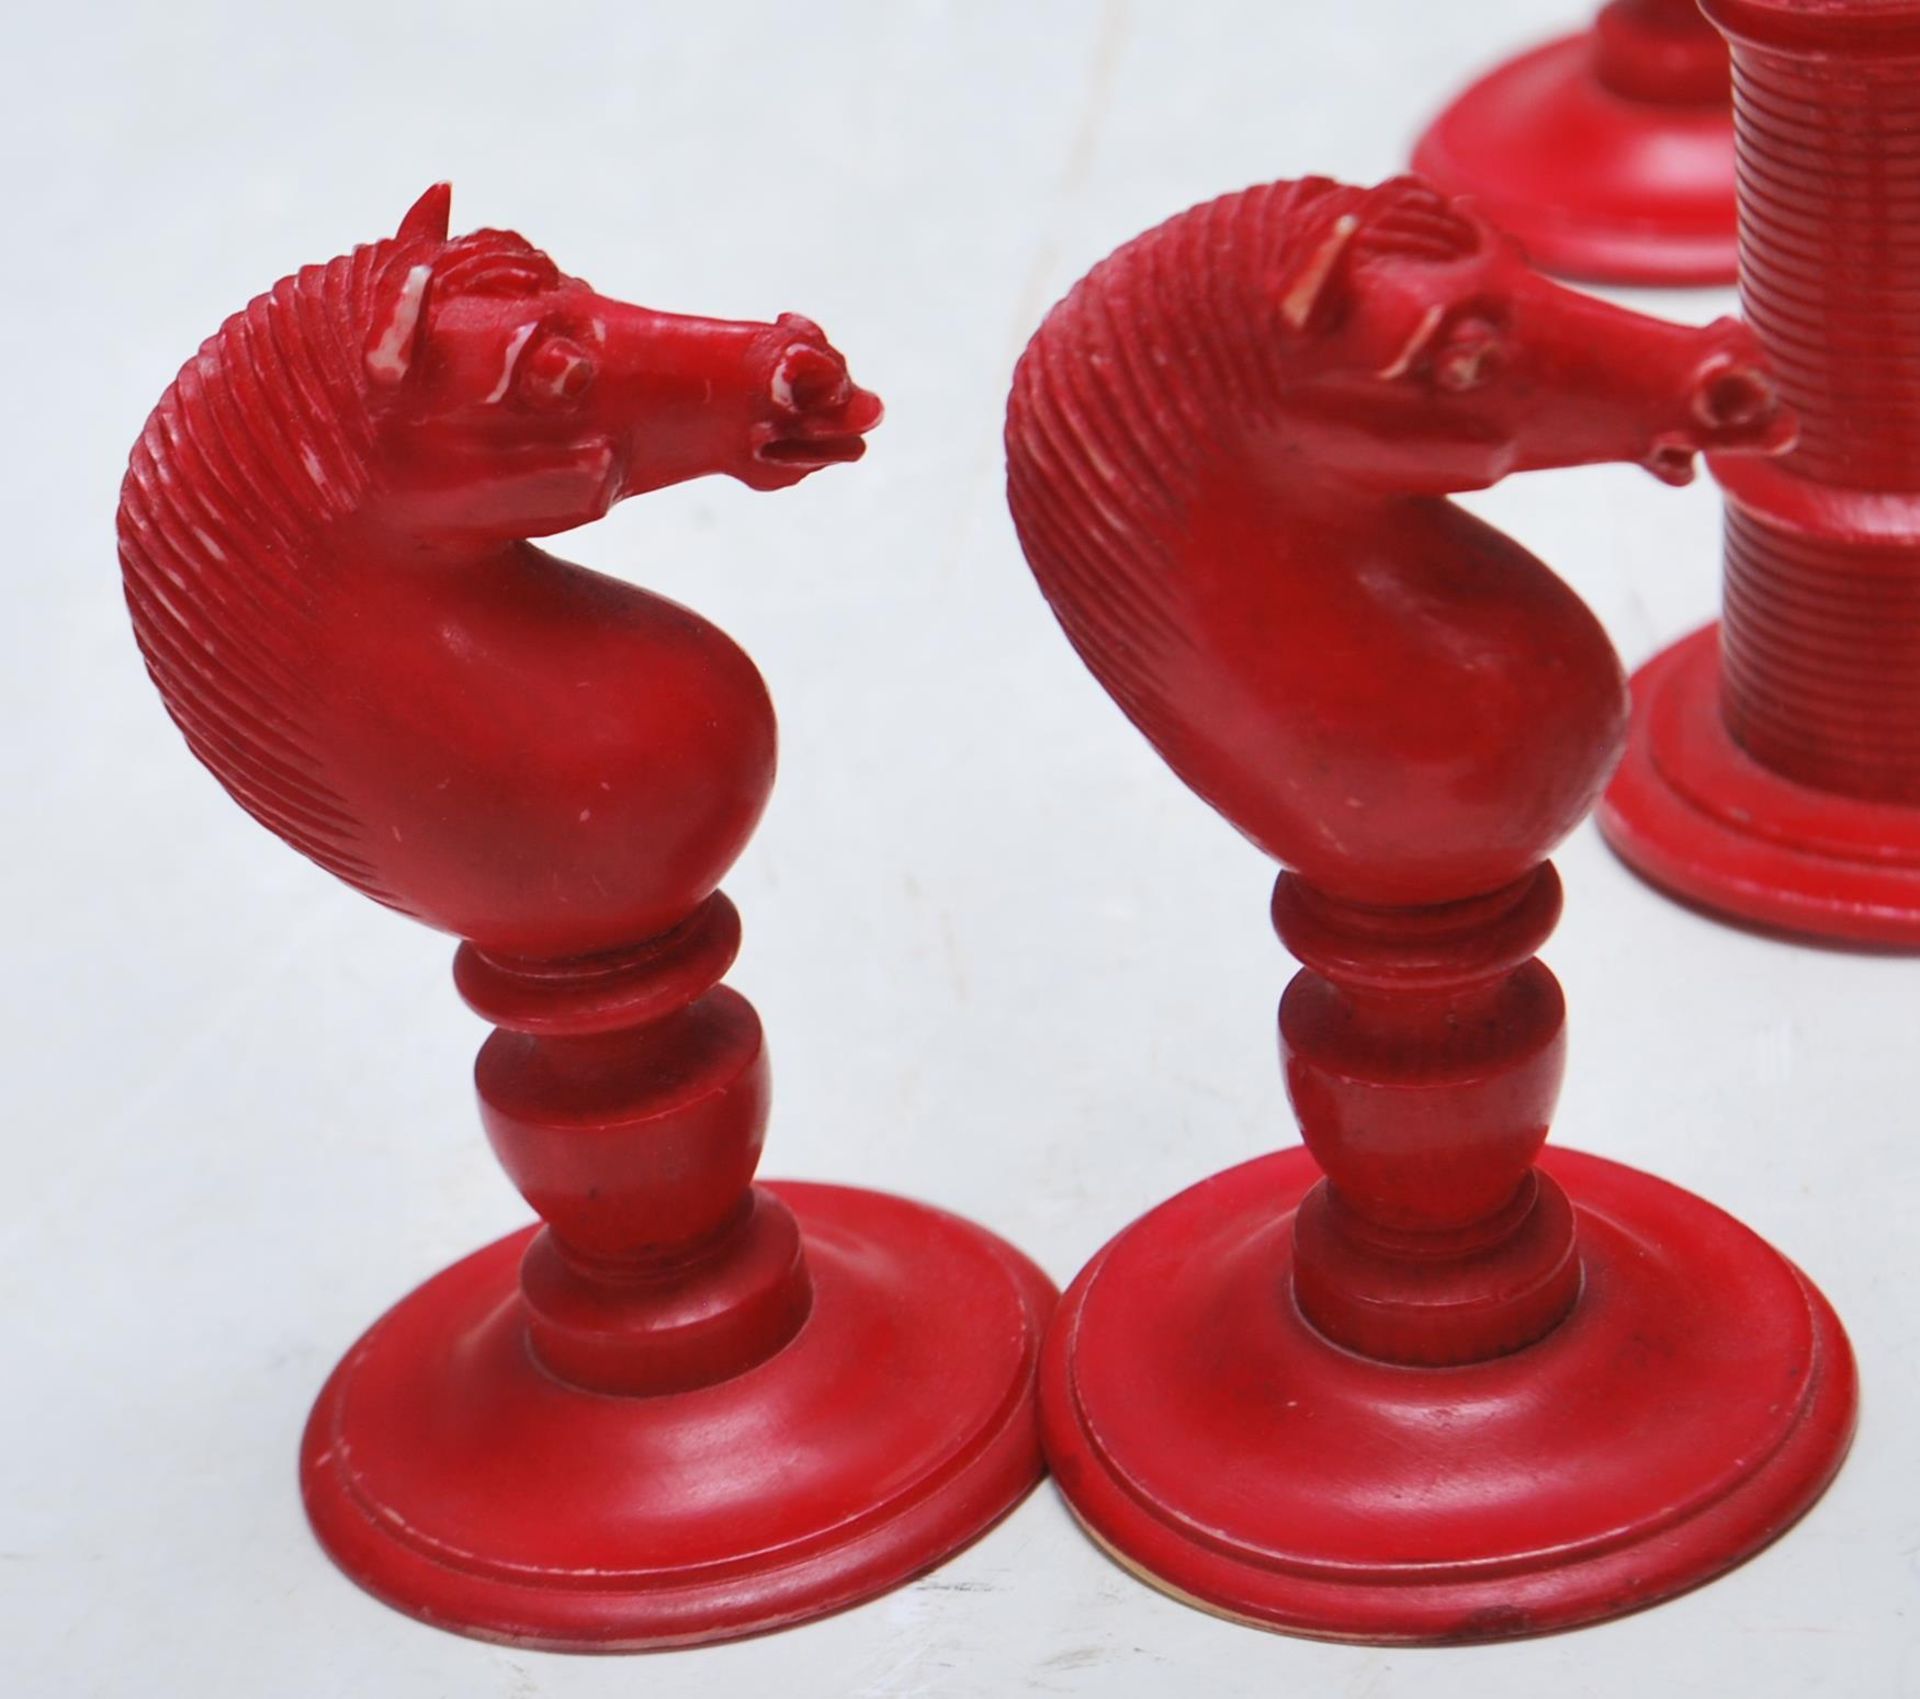 GROUP OF 19TH CENTURY VICTORIAN SATIN IVORY CHESS PIECES - Image 5 of 9